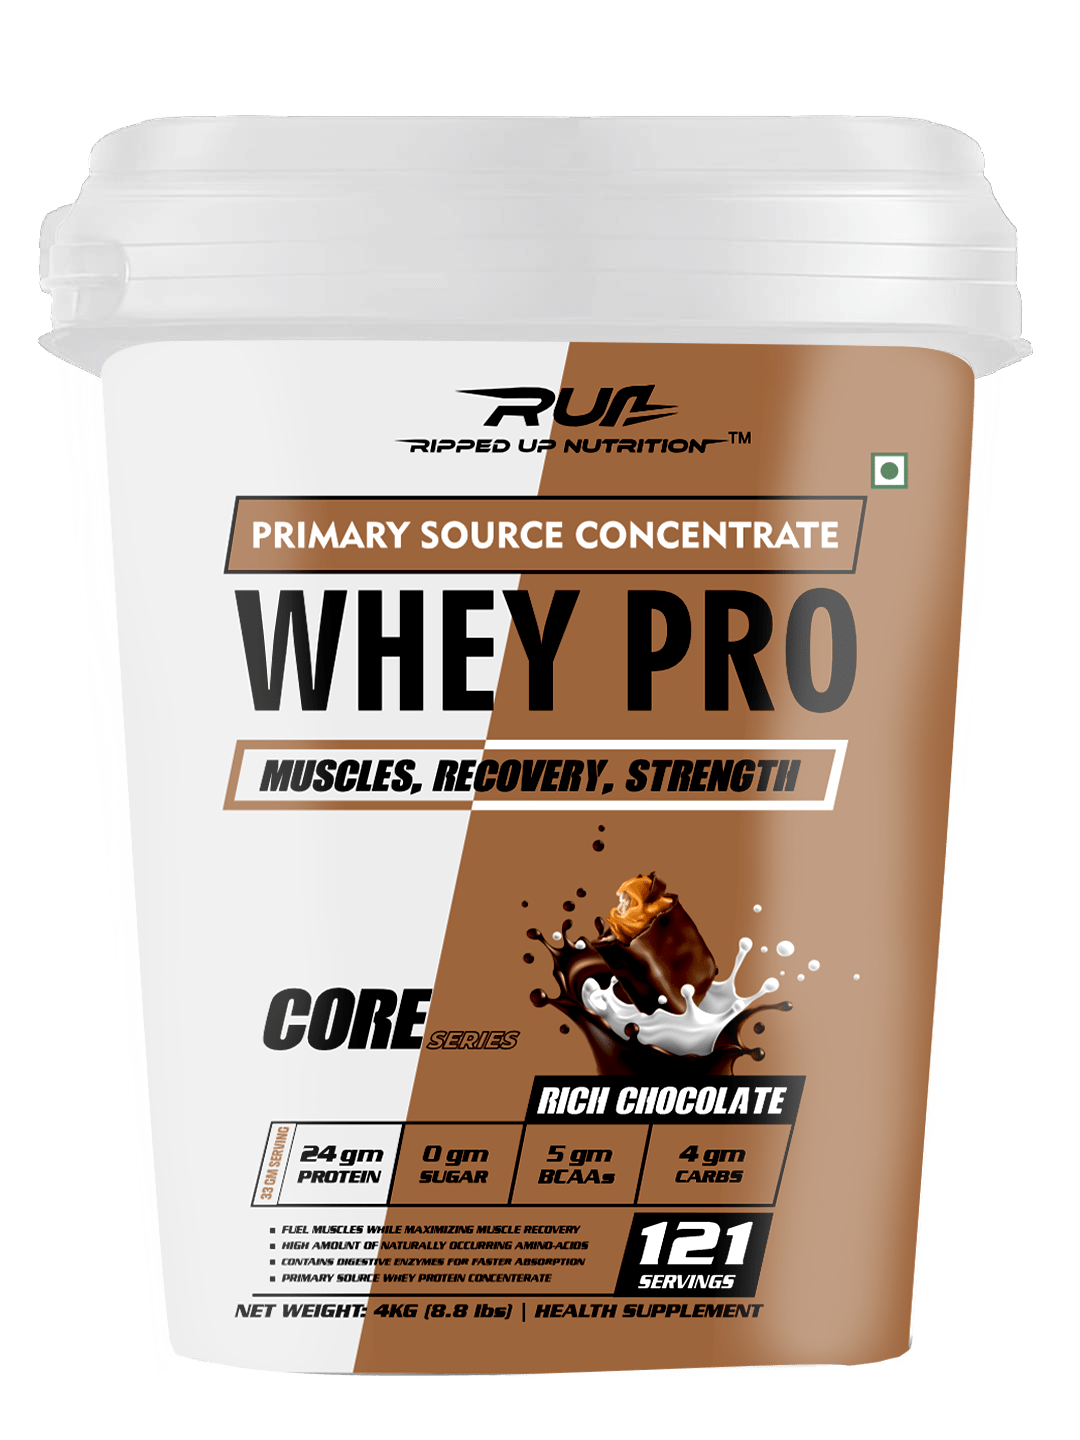 WHEY30 Performance Whey Protein Powder with 30g of Protein per Scoop to  Build Lean Muscle, Recover Quickly, and Preserve Gains for Stronger Body  and More Muscle Mass, Force Factor, 3 Pounds 